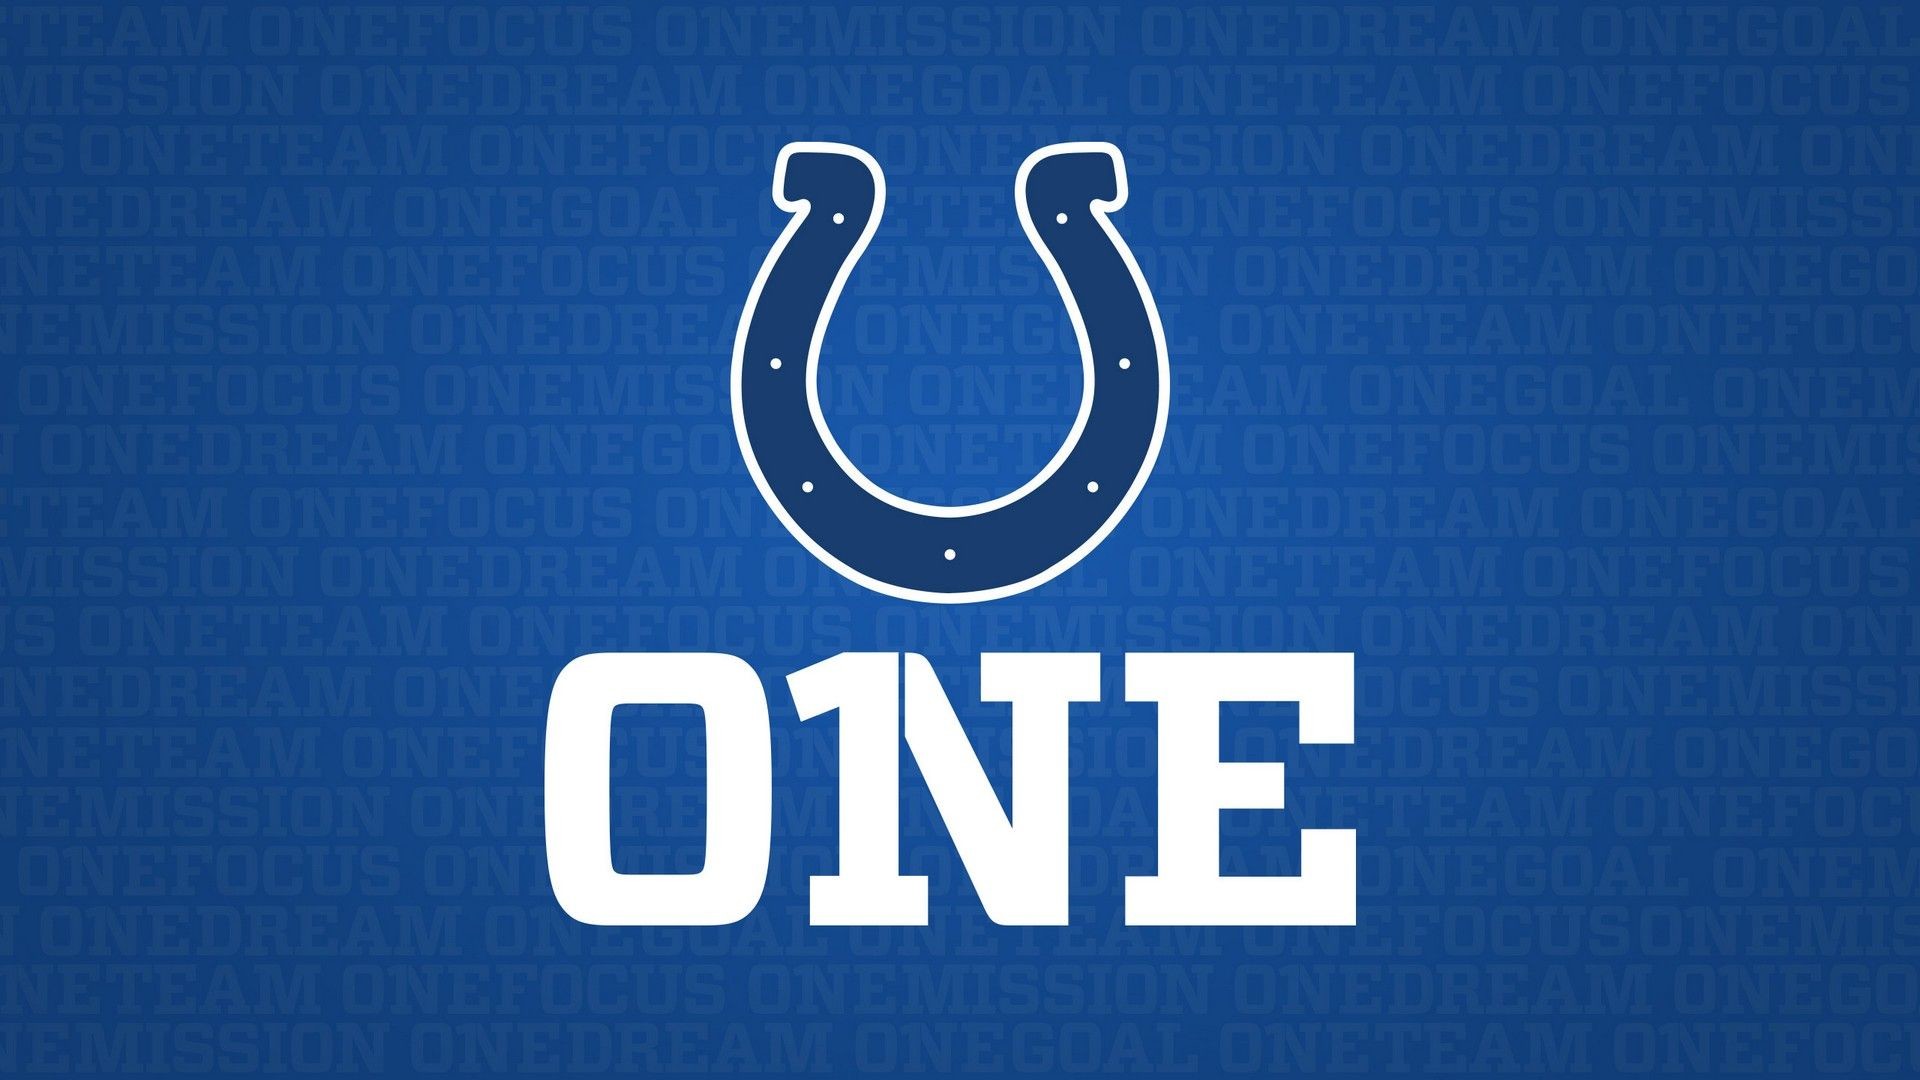 1920x1080 Indianapolis Colts Desktop Wallpapers | Best NFL Wallpapers